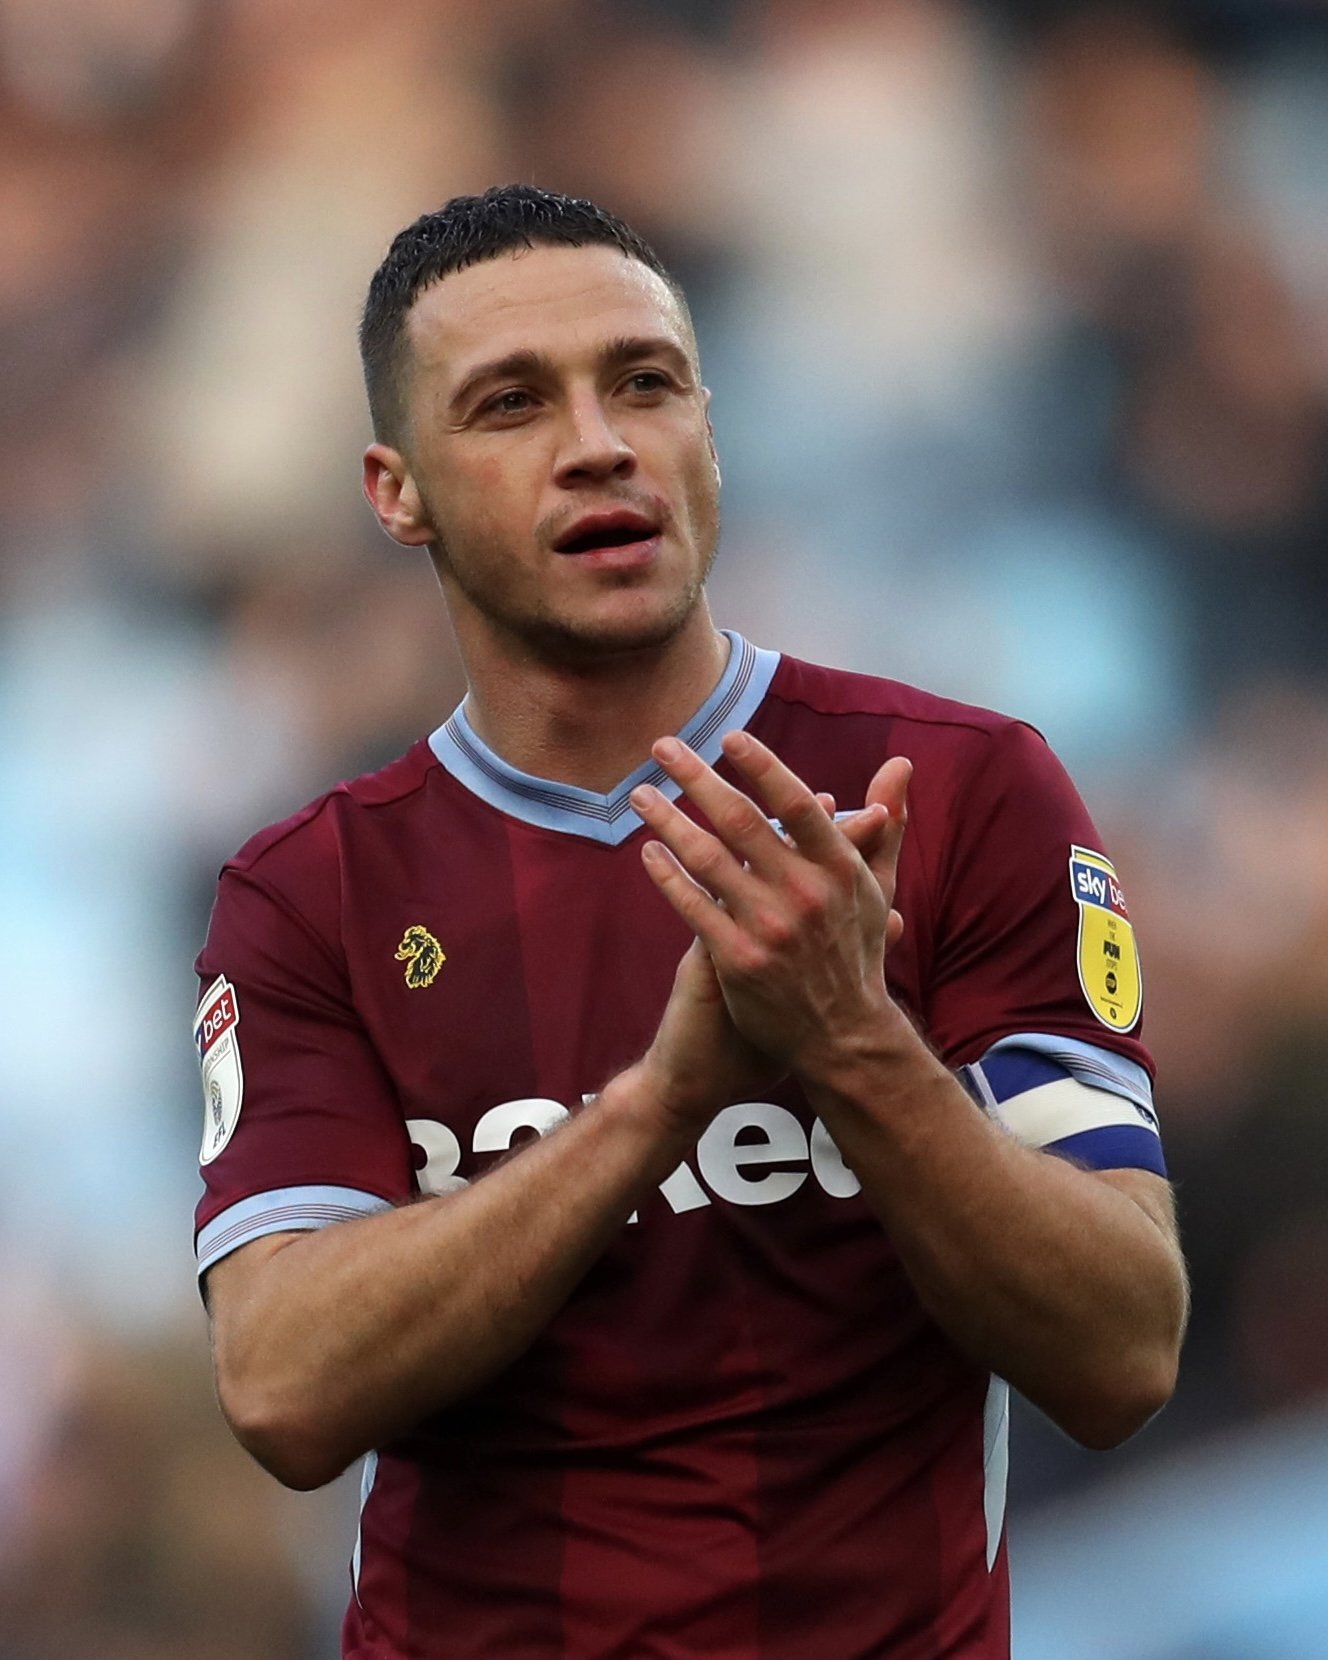 Happy birthday to our former captain, James Chester. 